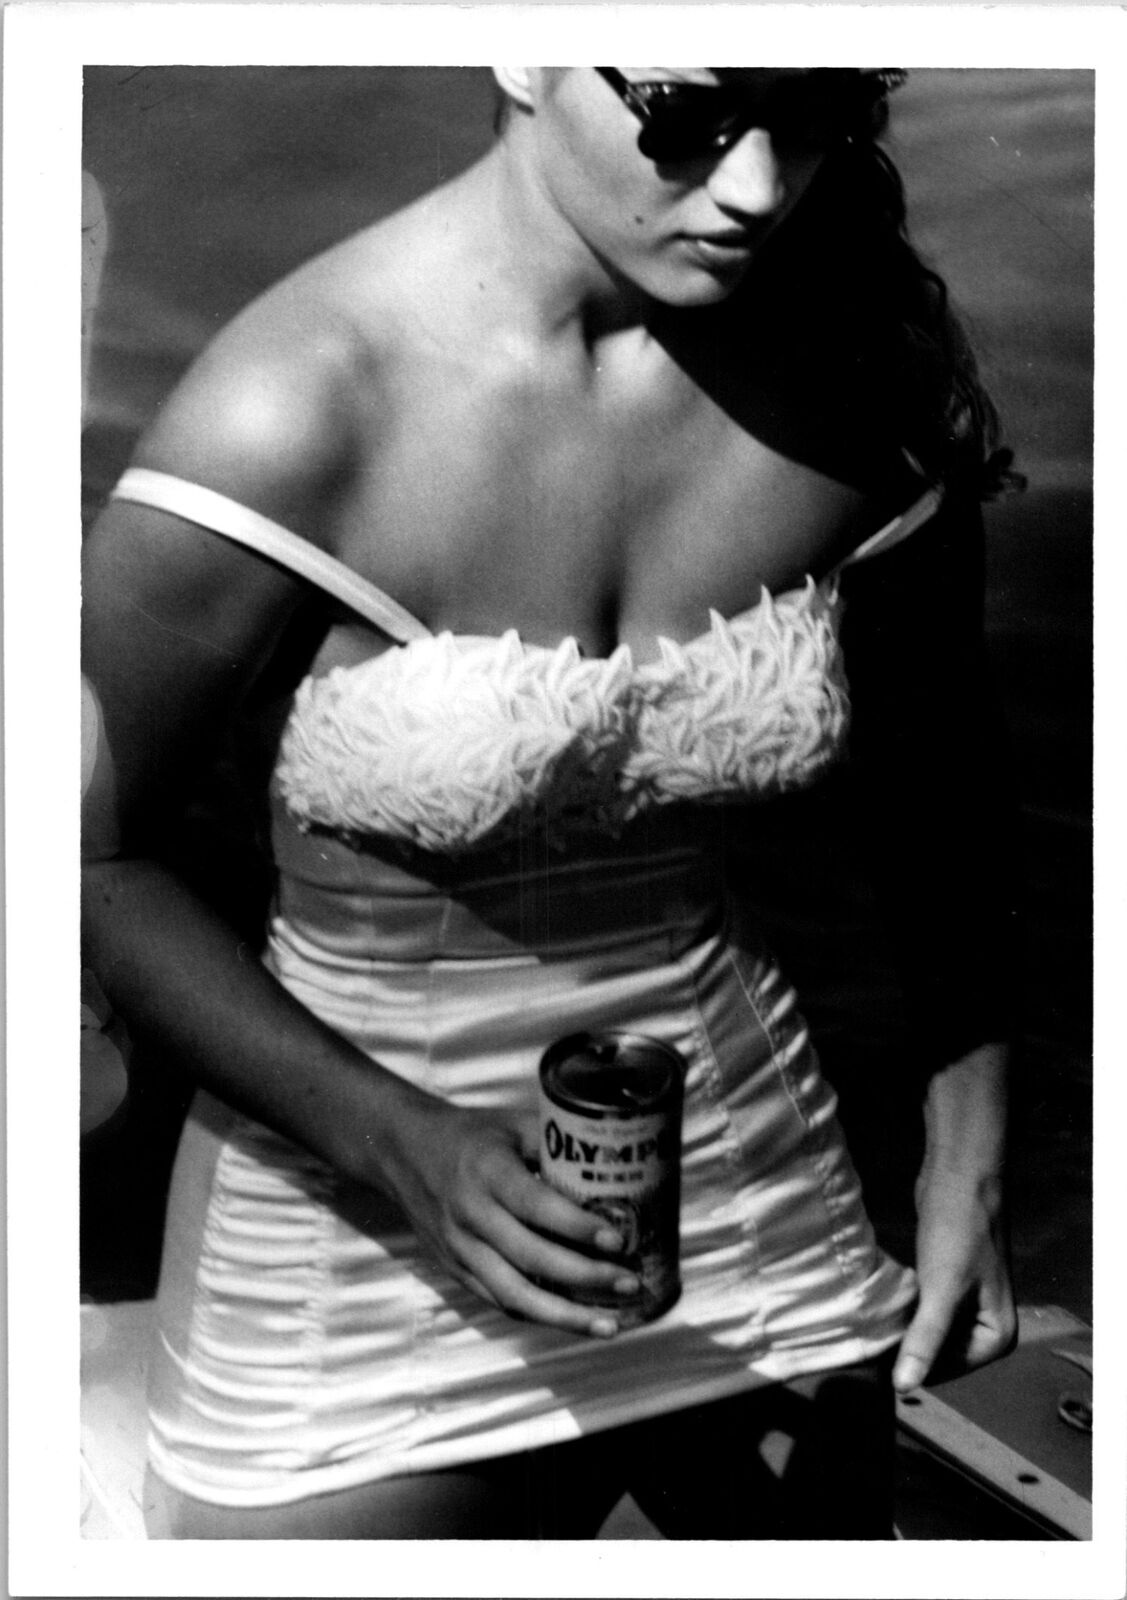 Pretty woman wearing white bathing suit hold Olympia beer can Found Photo V0467